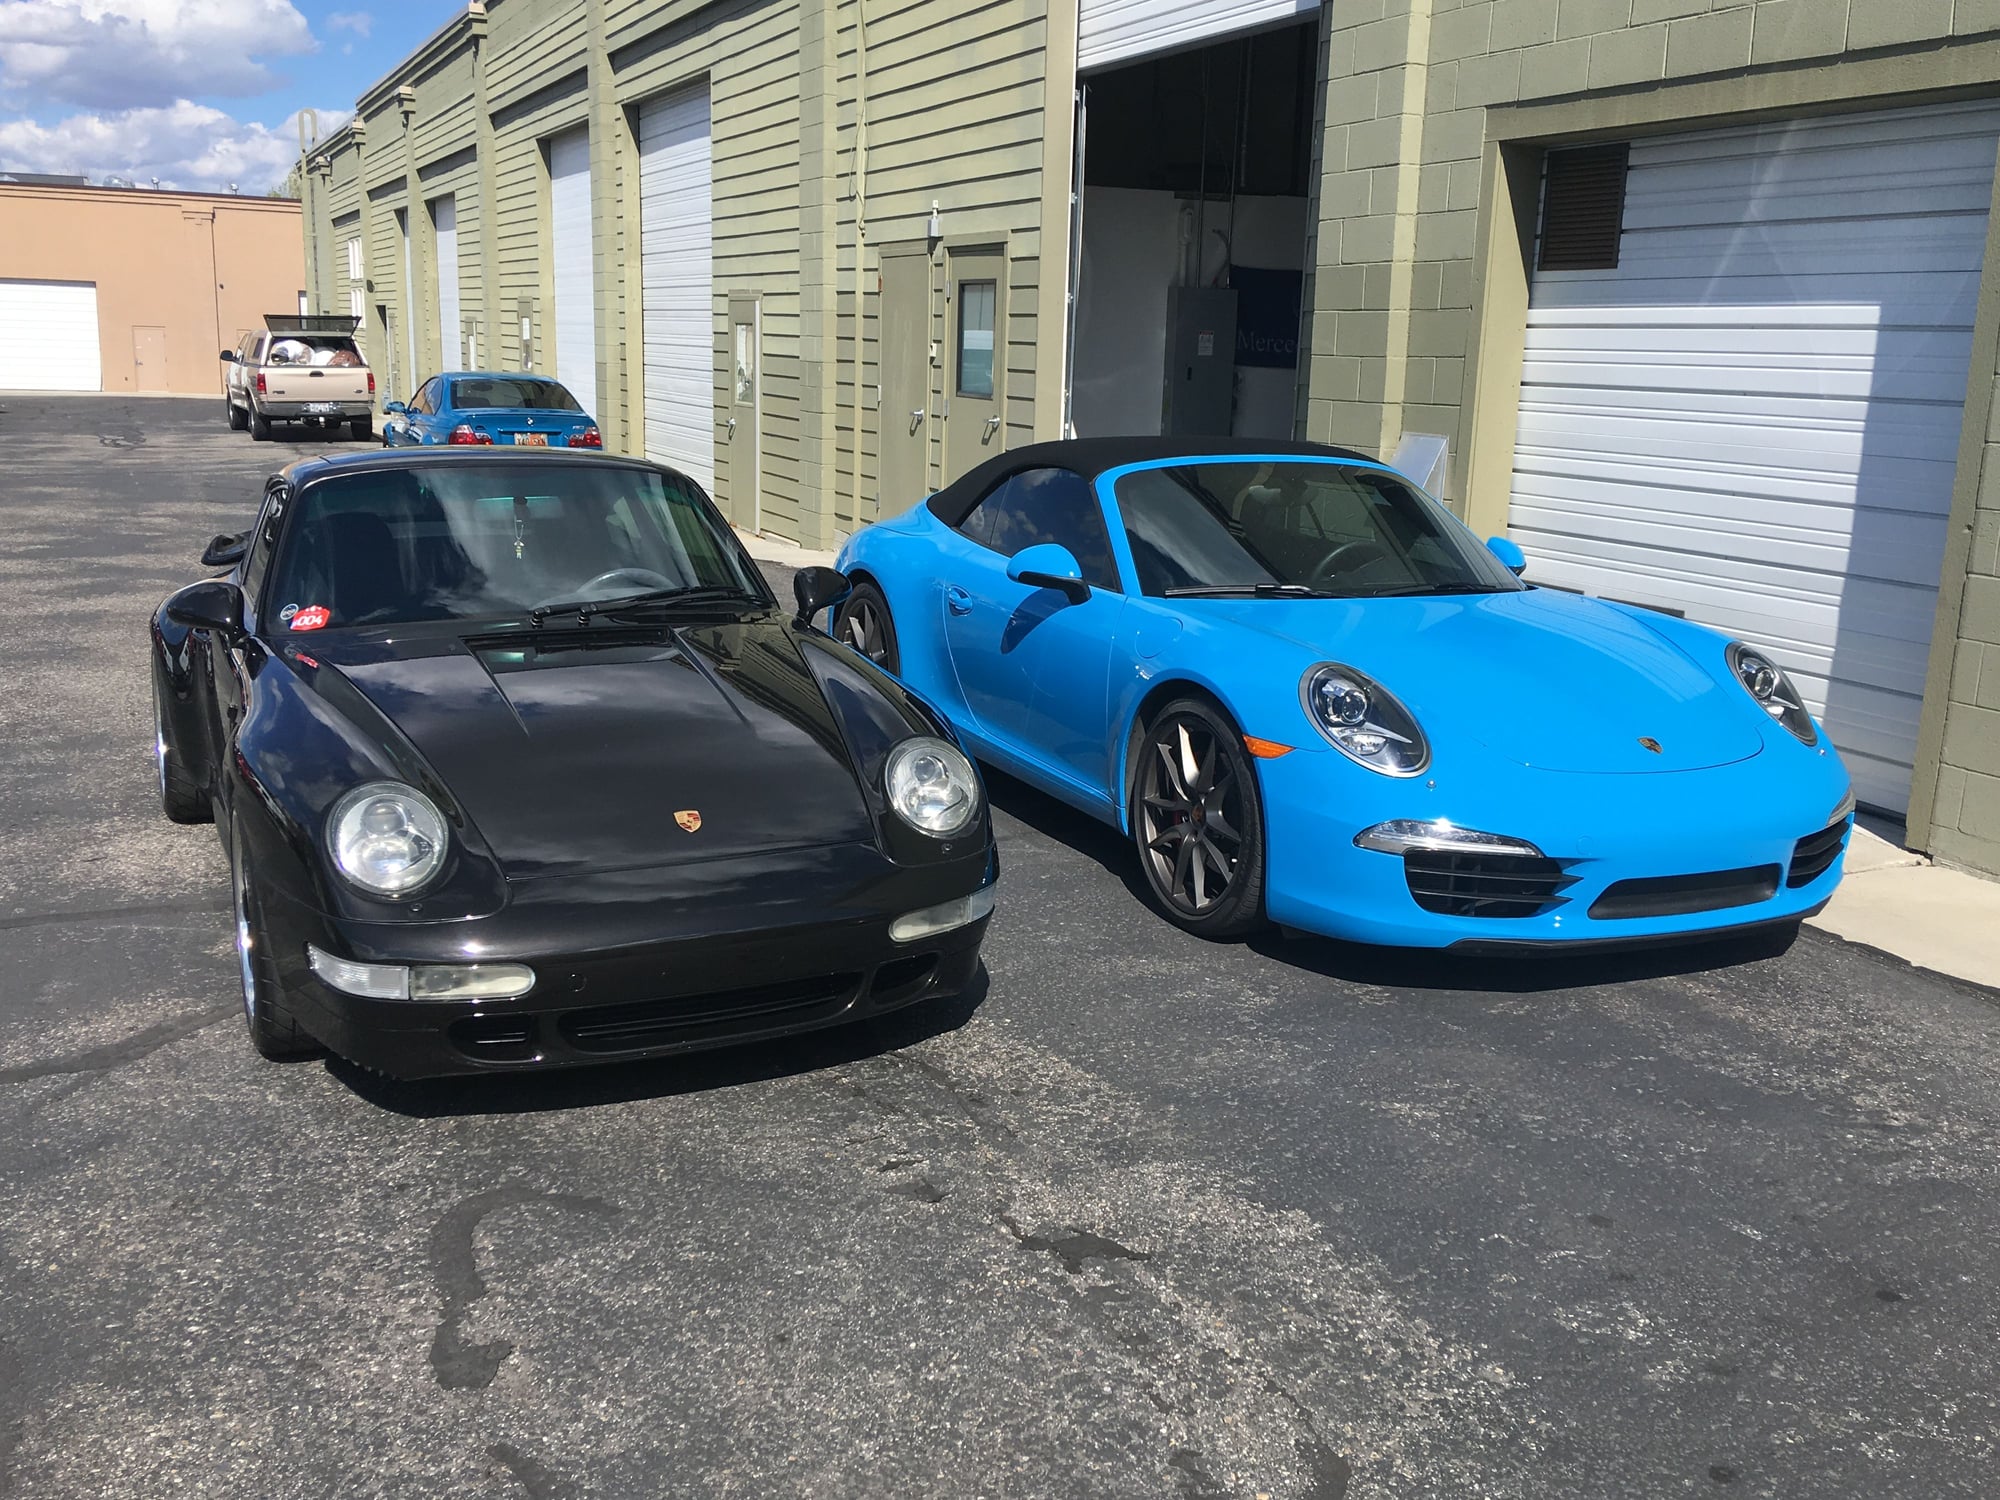 2013 Porsche 911 - 2013 991S Cab PDK PTS Mexico Blue - Used - VIN WP0CB2A92DS155241 - 13,250 Miles - 6 cyl - 2WD - Automatic - Convertible - Blue - Park City, UT 84060, United States